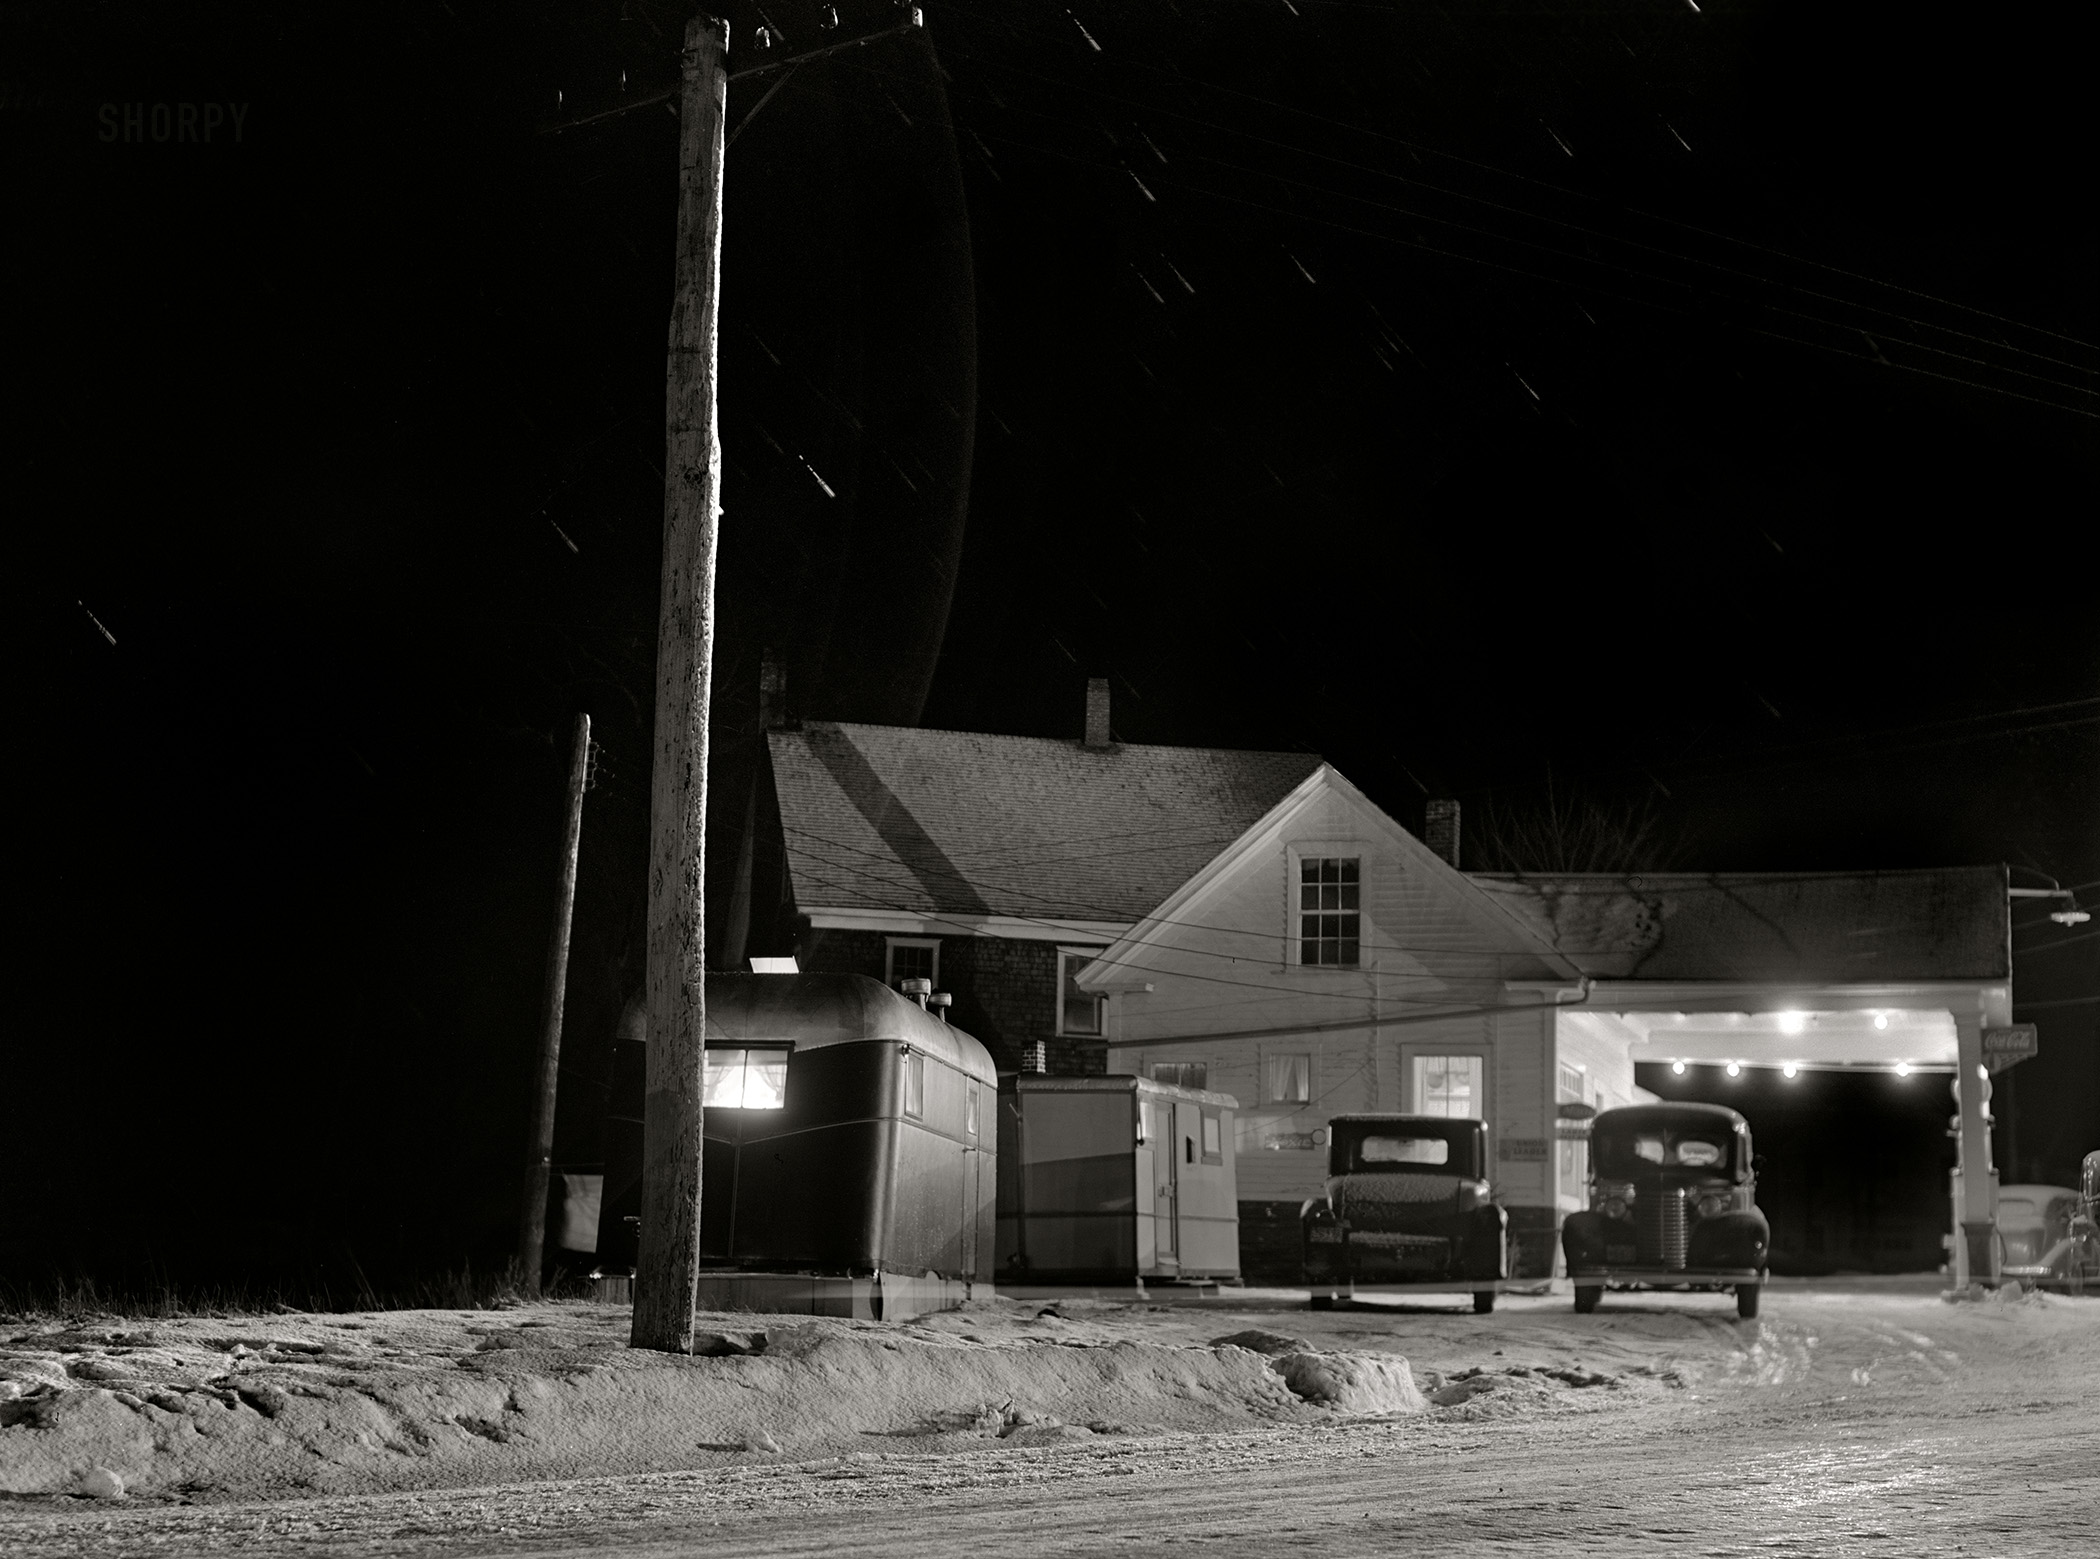 December 1940. "Trailer parked near service station. Bath, Maine." Medium format acetate negative by Jack Delano for the Farm Security Administration. View full size.